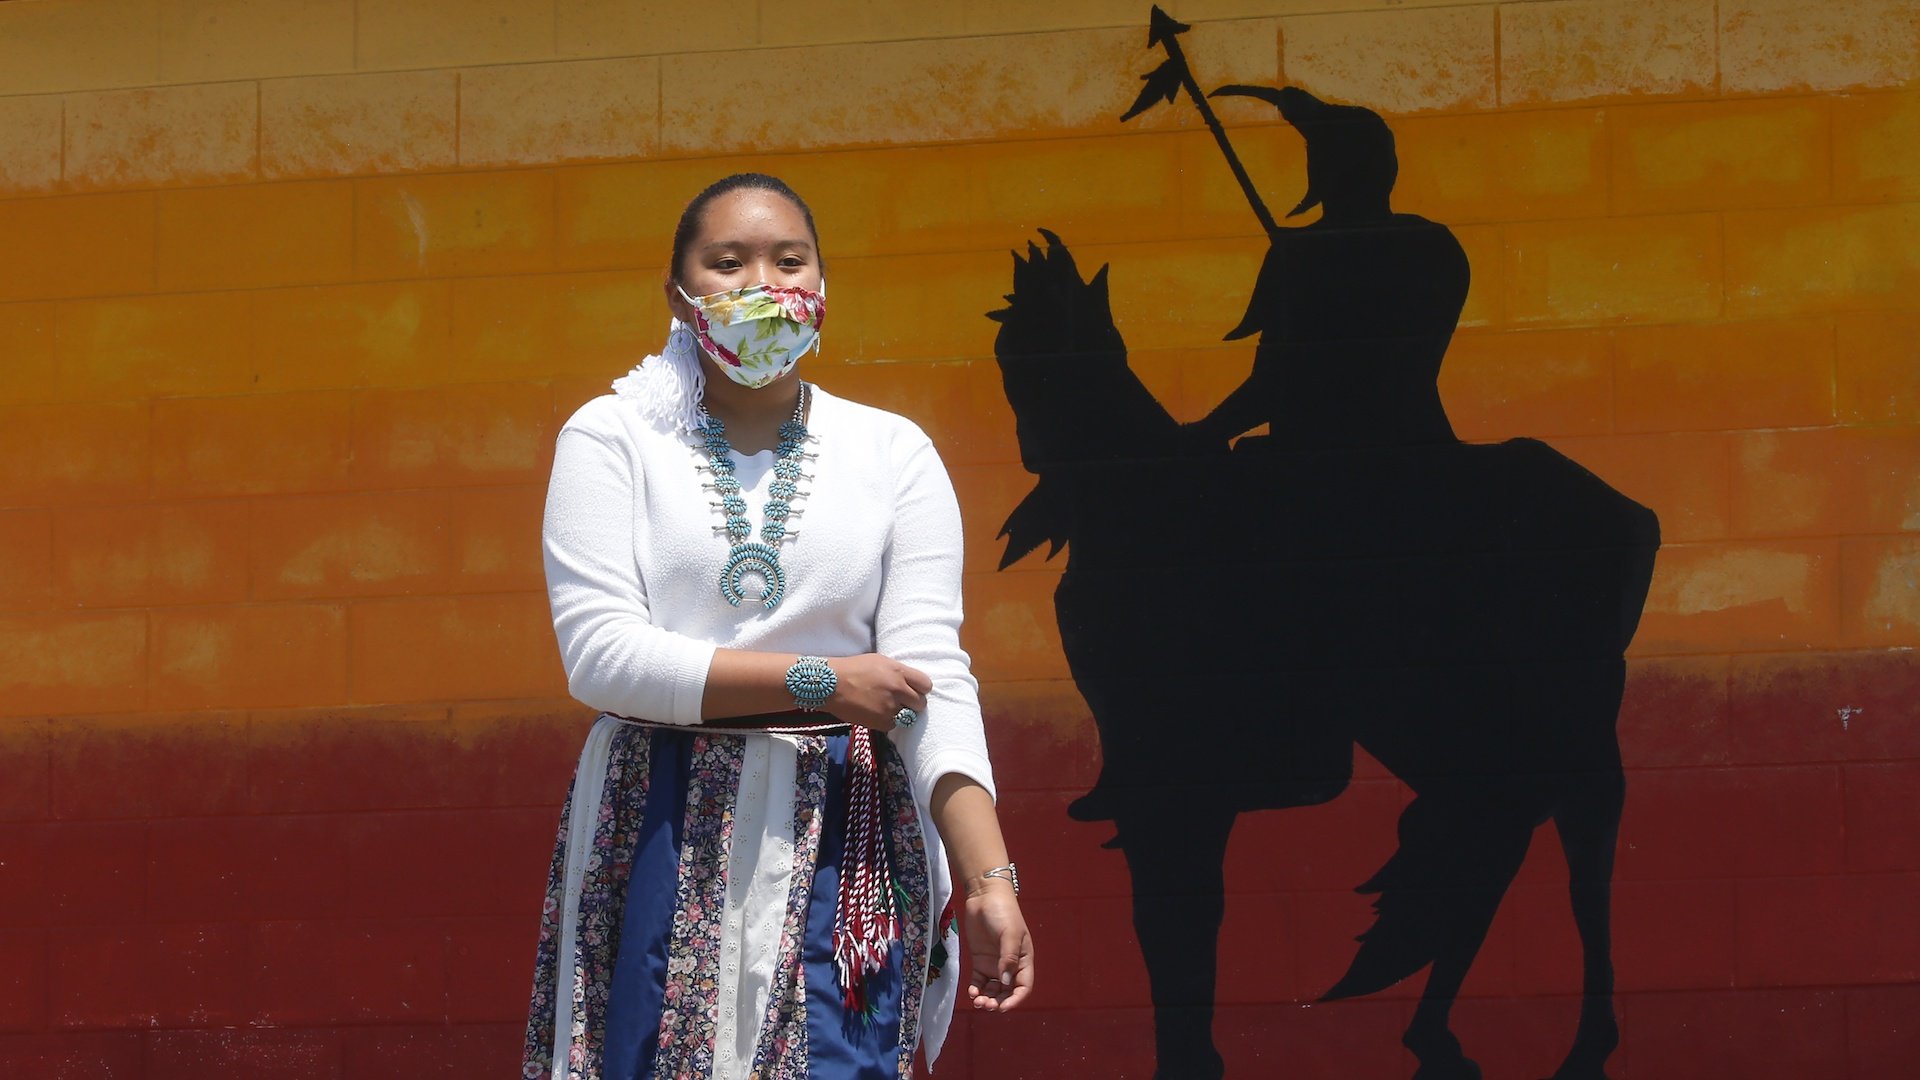 Lemiley Lane, a Bountiful junior who grew up in the Navajo Nation in Arizona, walks along the campus near a a mural of an Indigenous man meant to represent the Braves mascot at Bountiful High School, July 21, 2020, in Bountiful, Utah. (AP Photo/Rick Bowmer)